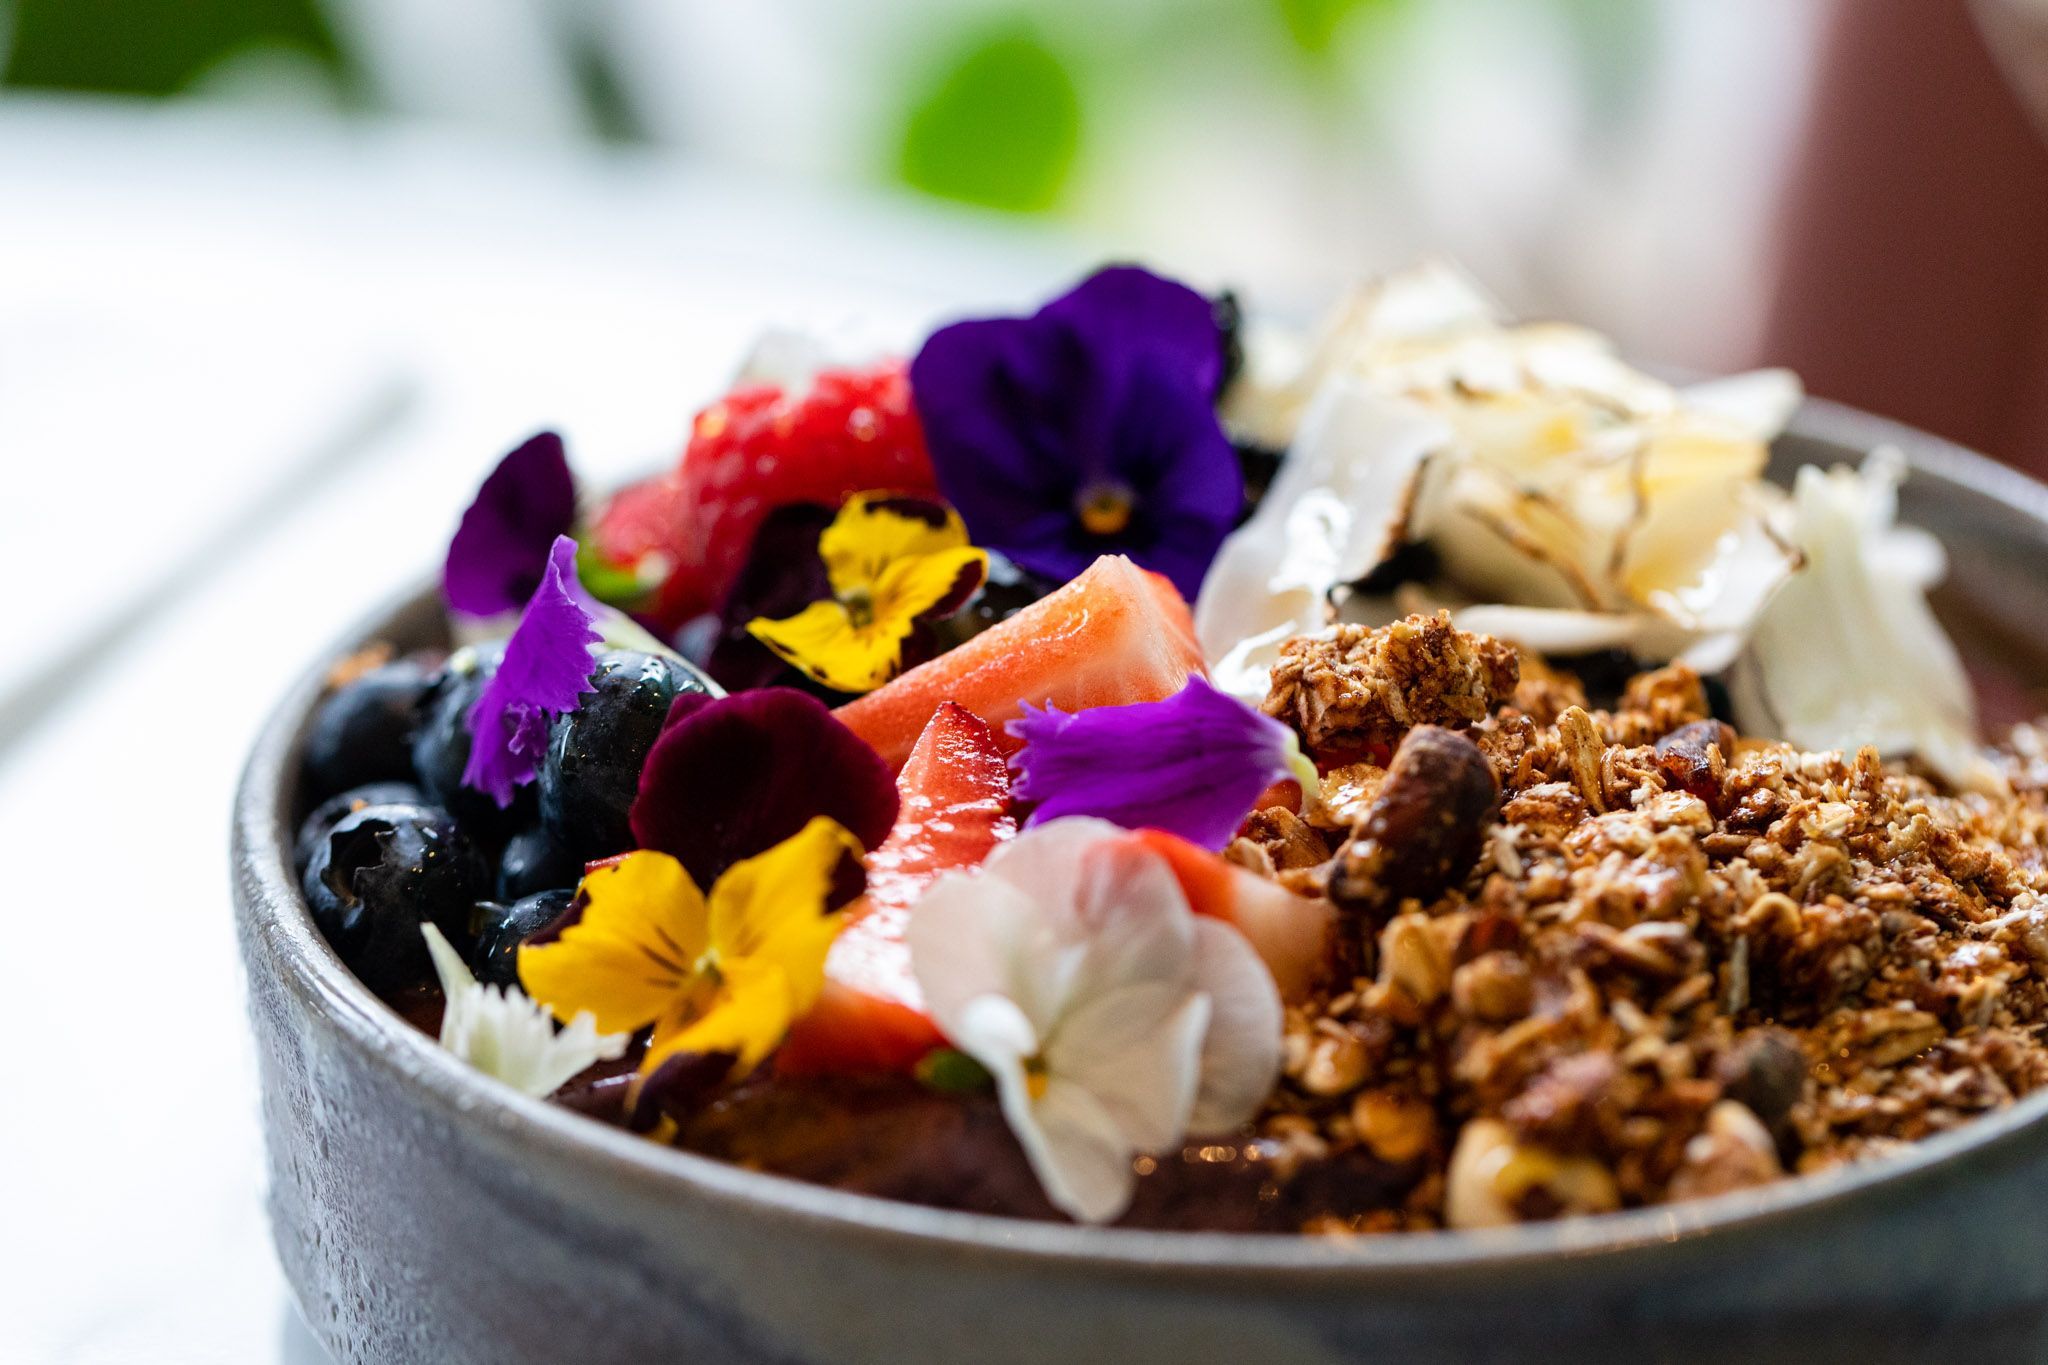 close up shot of the grey bowl filled with granola, fruits, and small flowers as decoration